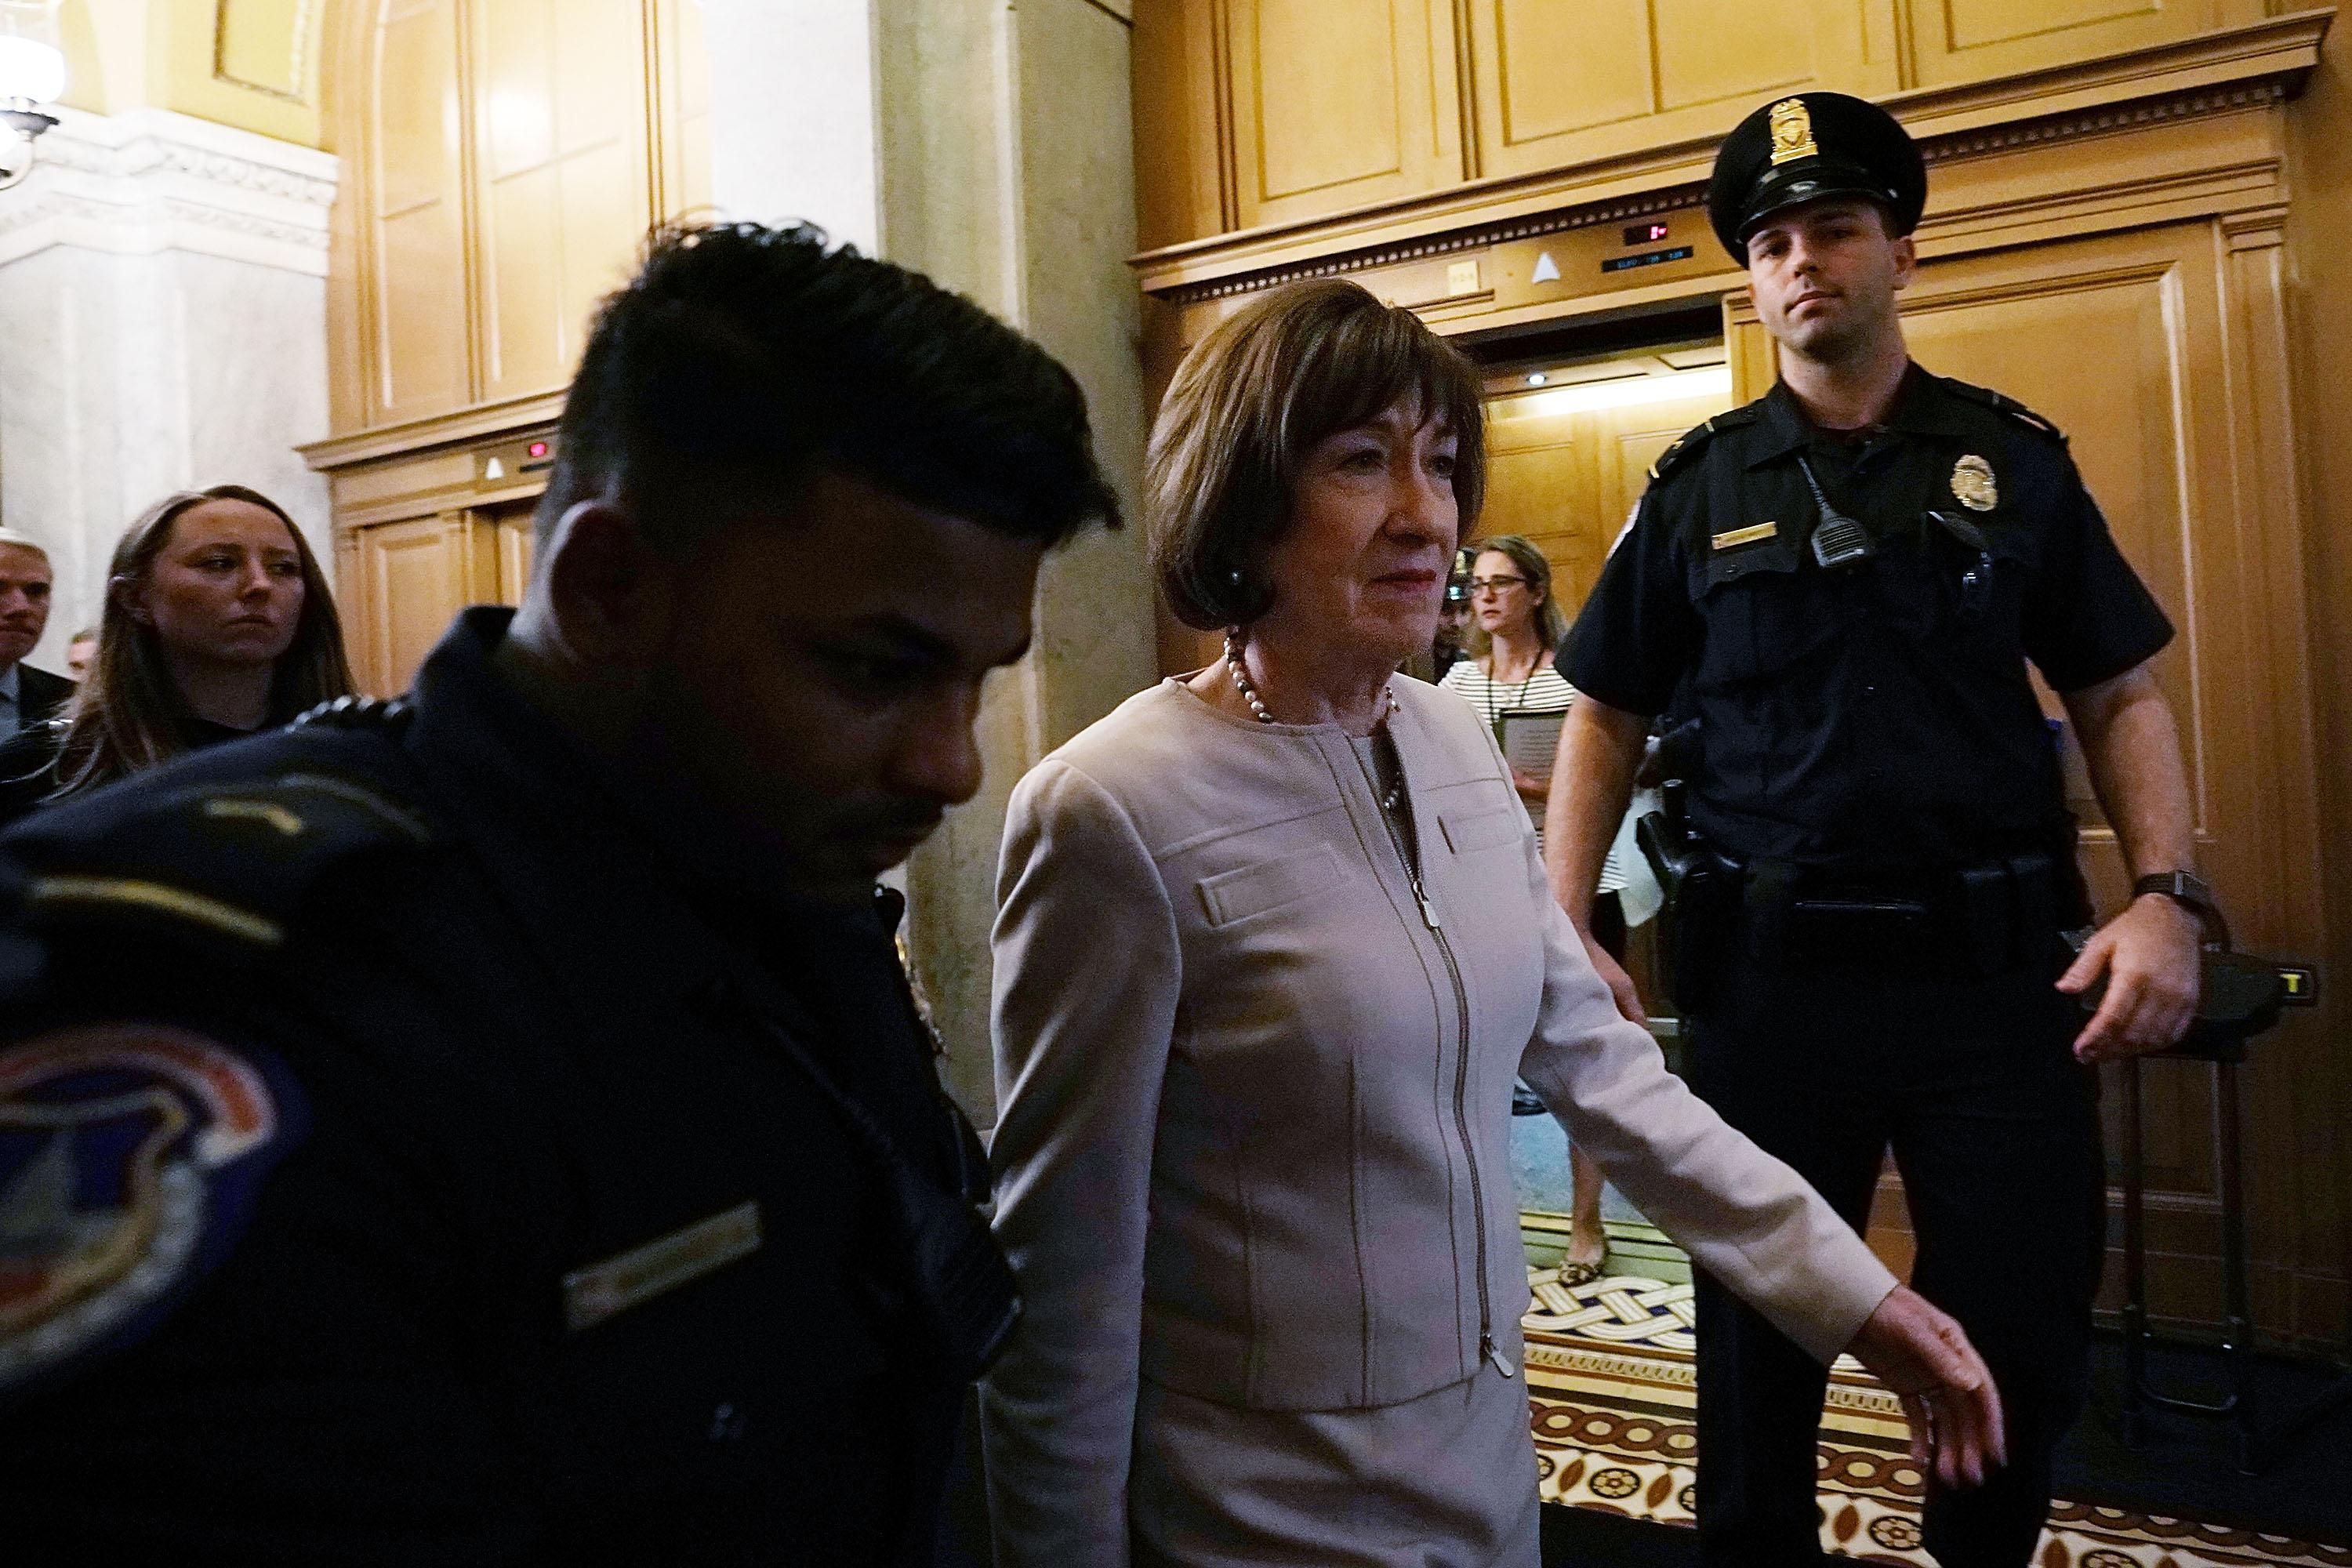 Sen. Susan Collins (R-Maine) leaves after a floor speech announcing that she would vote to confirm Supreme Court Justice Brett Kavanaugh on October 5, 2018 in Washington, D.C.